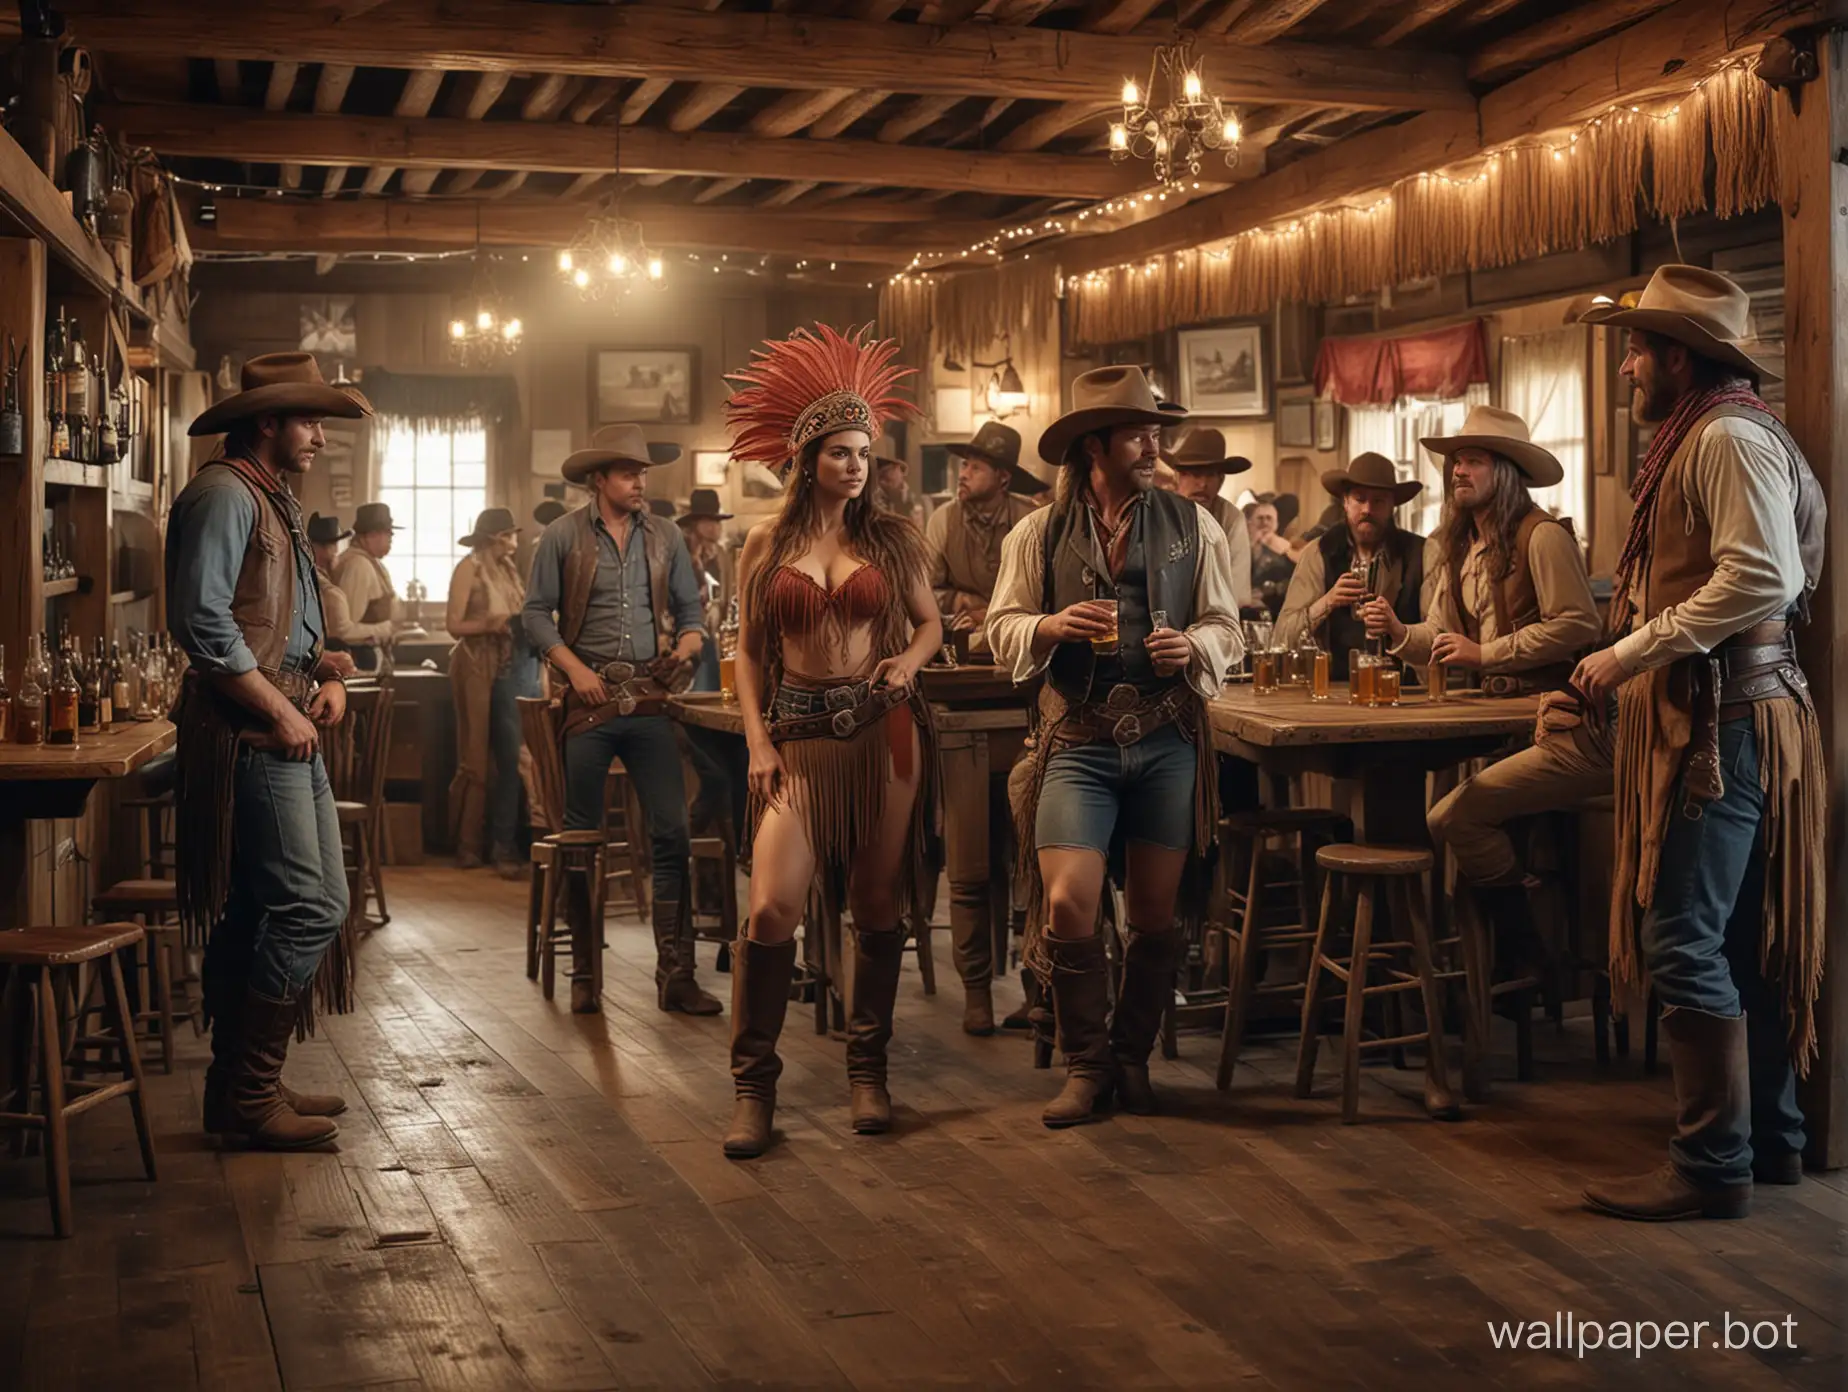 A stunning high-resolution image of cowboys gathered in an 1880s wild west saloon. The dimly lit room is filled with rough-hewn wooden tables and chairs, and the bar is stocked with an array of whiskey bottles. The cowboys, dressed in worn leather chaps and frayed denim, are engaged in lively conversation over their drinks. Scantily-clad dance hall girls with feathered headdresses and fringed shawls are seen mingling with the patrons, adding to the lively atmosphere. The dance floor is empty, awaiting the start of the evening's entertainment., photo, 8k